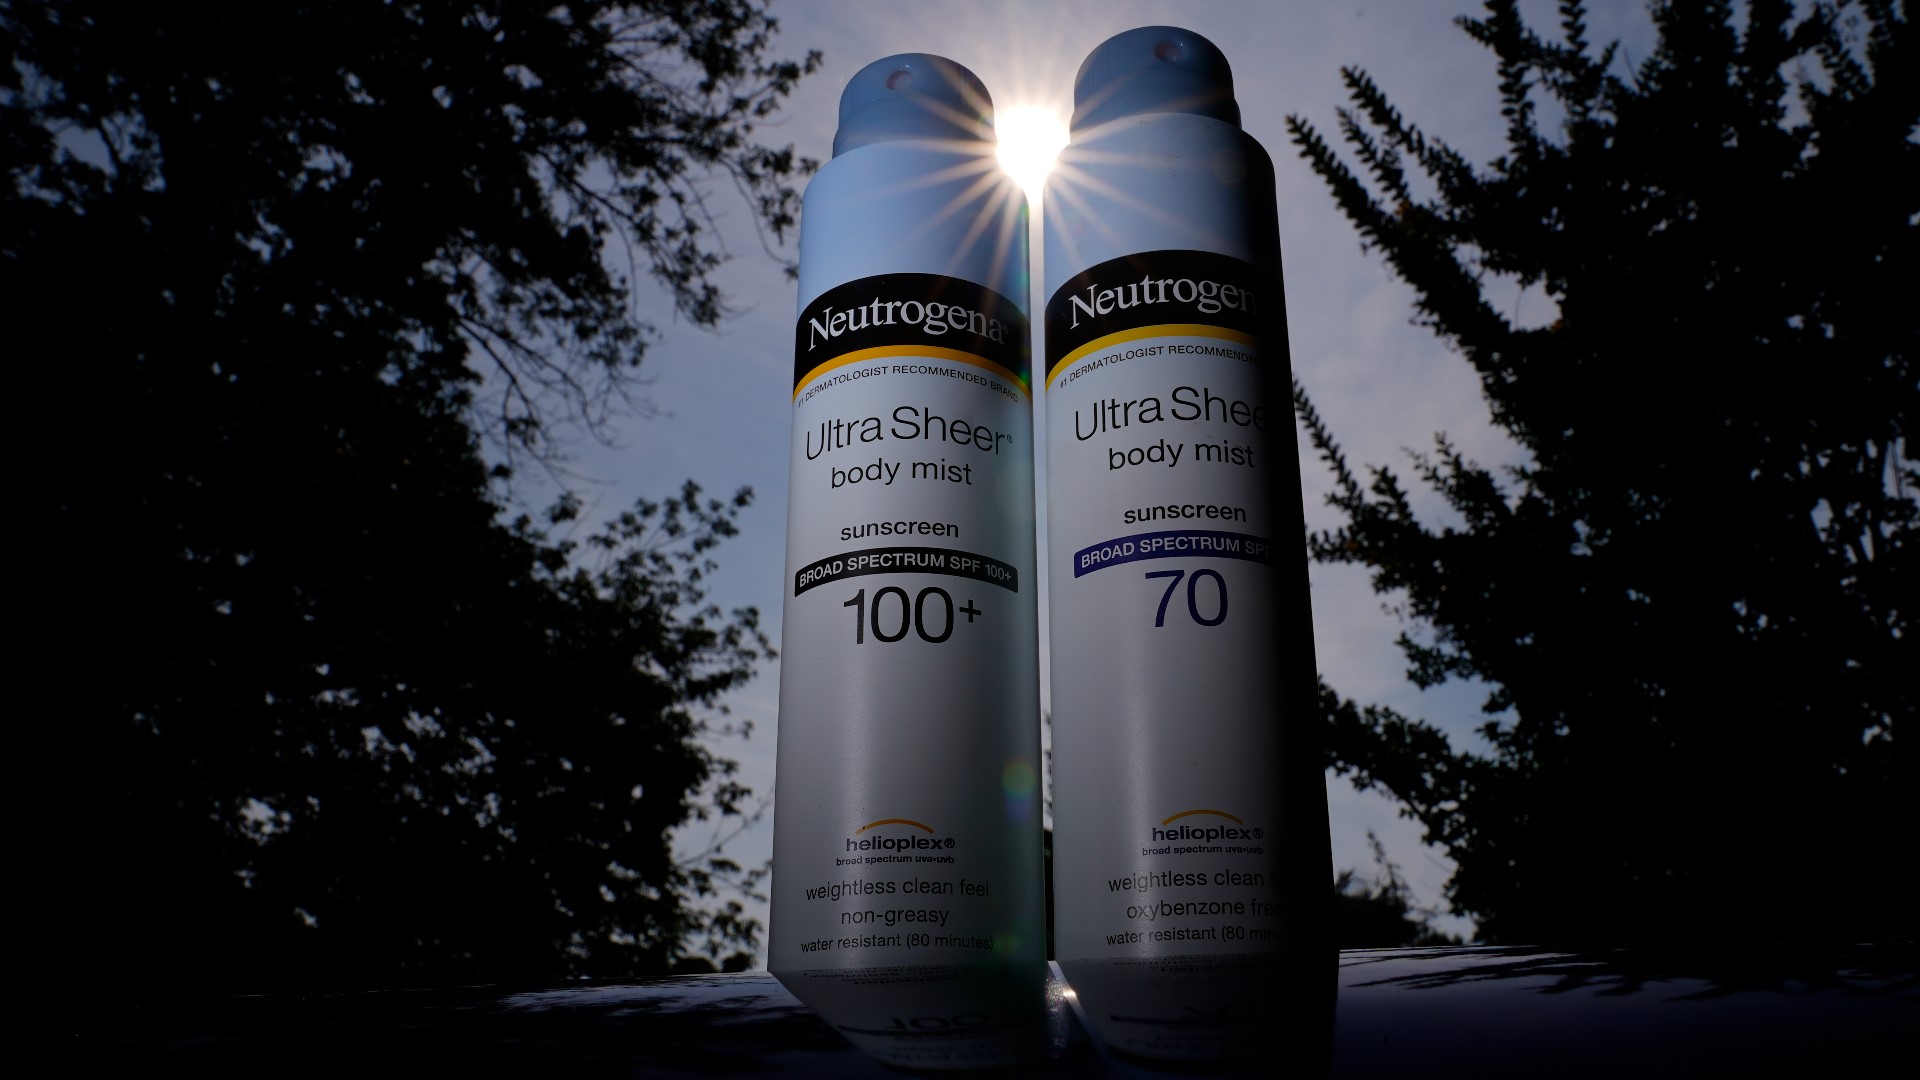 Four Neutrogena sunscreens and one Aveeno sunscreen spray have been voluntarily taken off shelves after traces of cancer-causing chemical benzene.